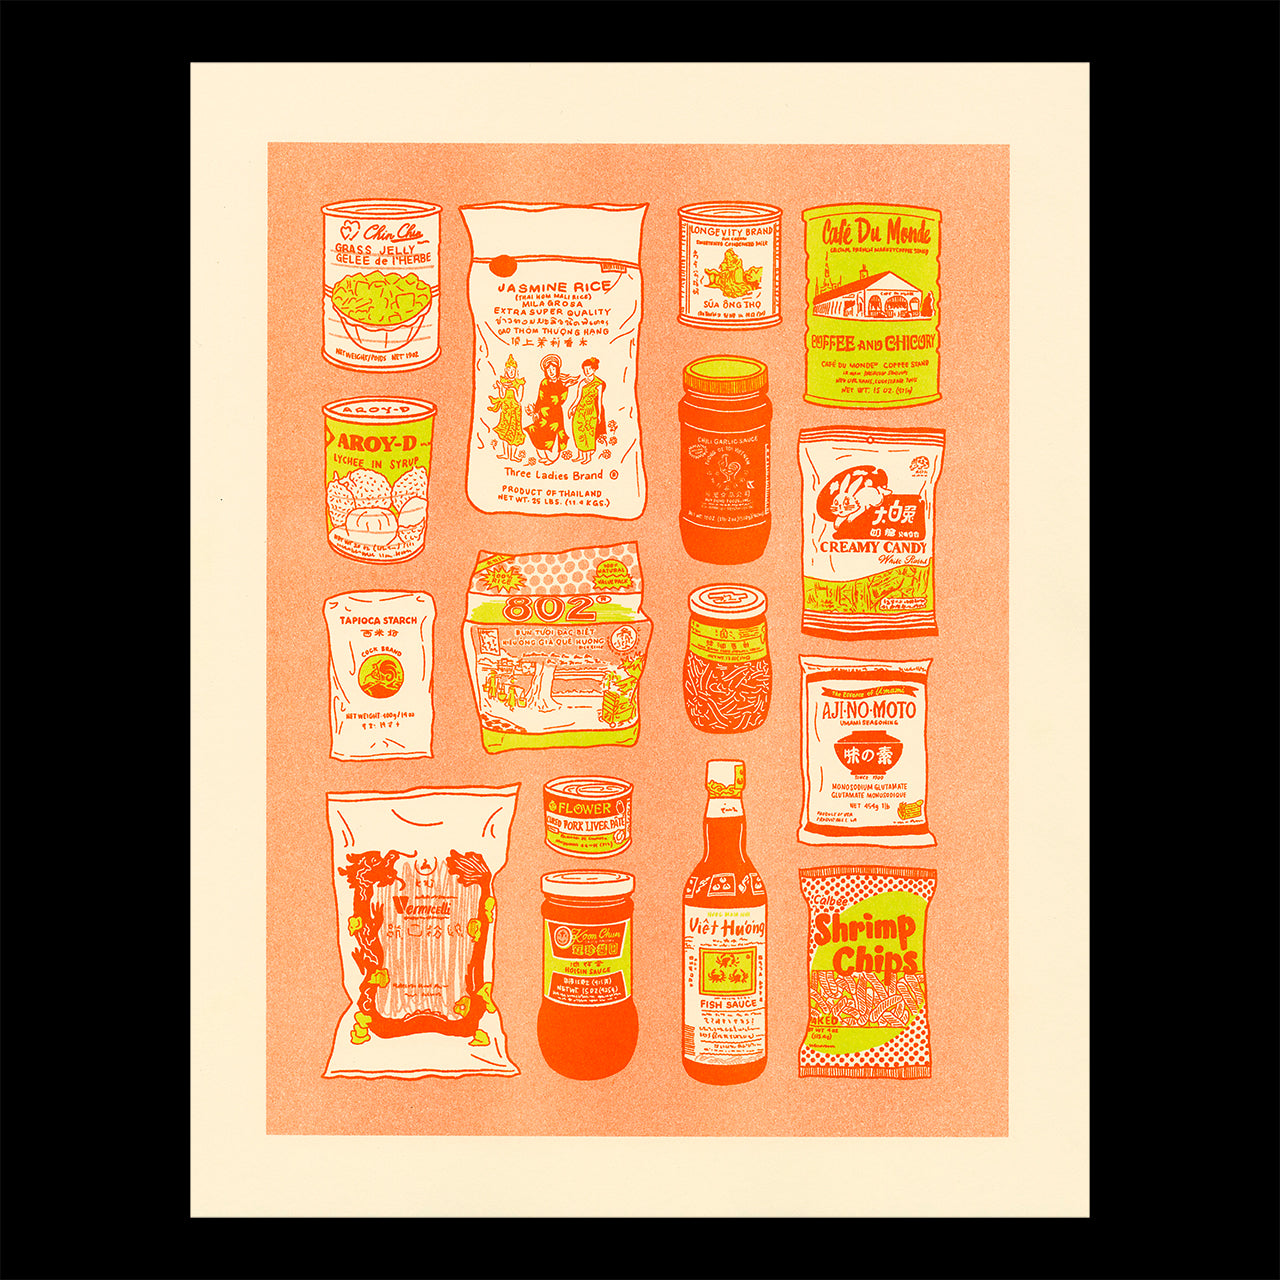 Risograph printed illustration showing common items found in the pantry of a Vietnamese home